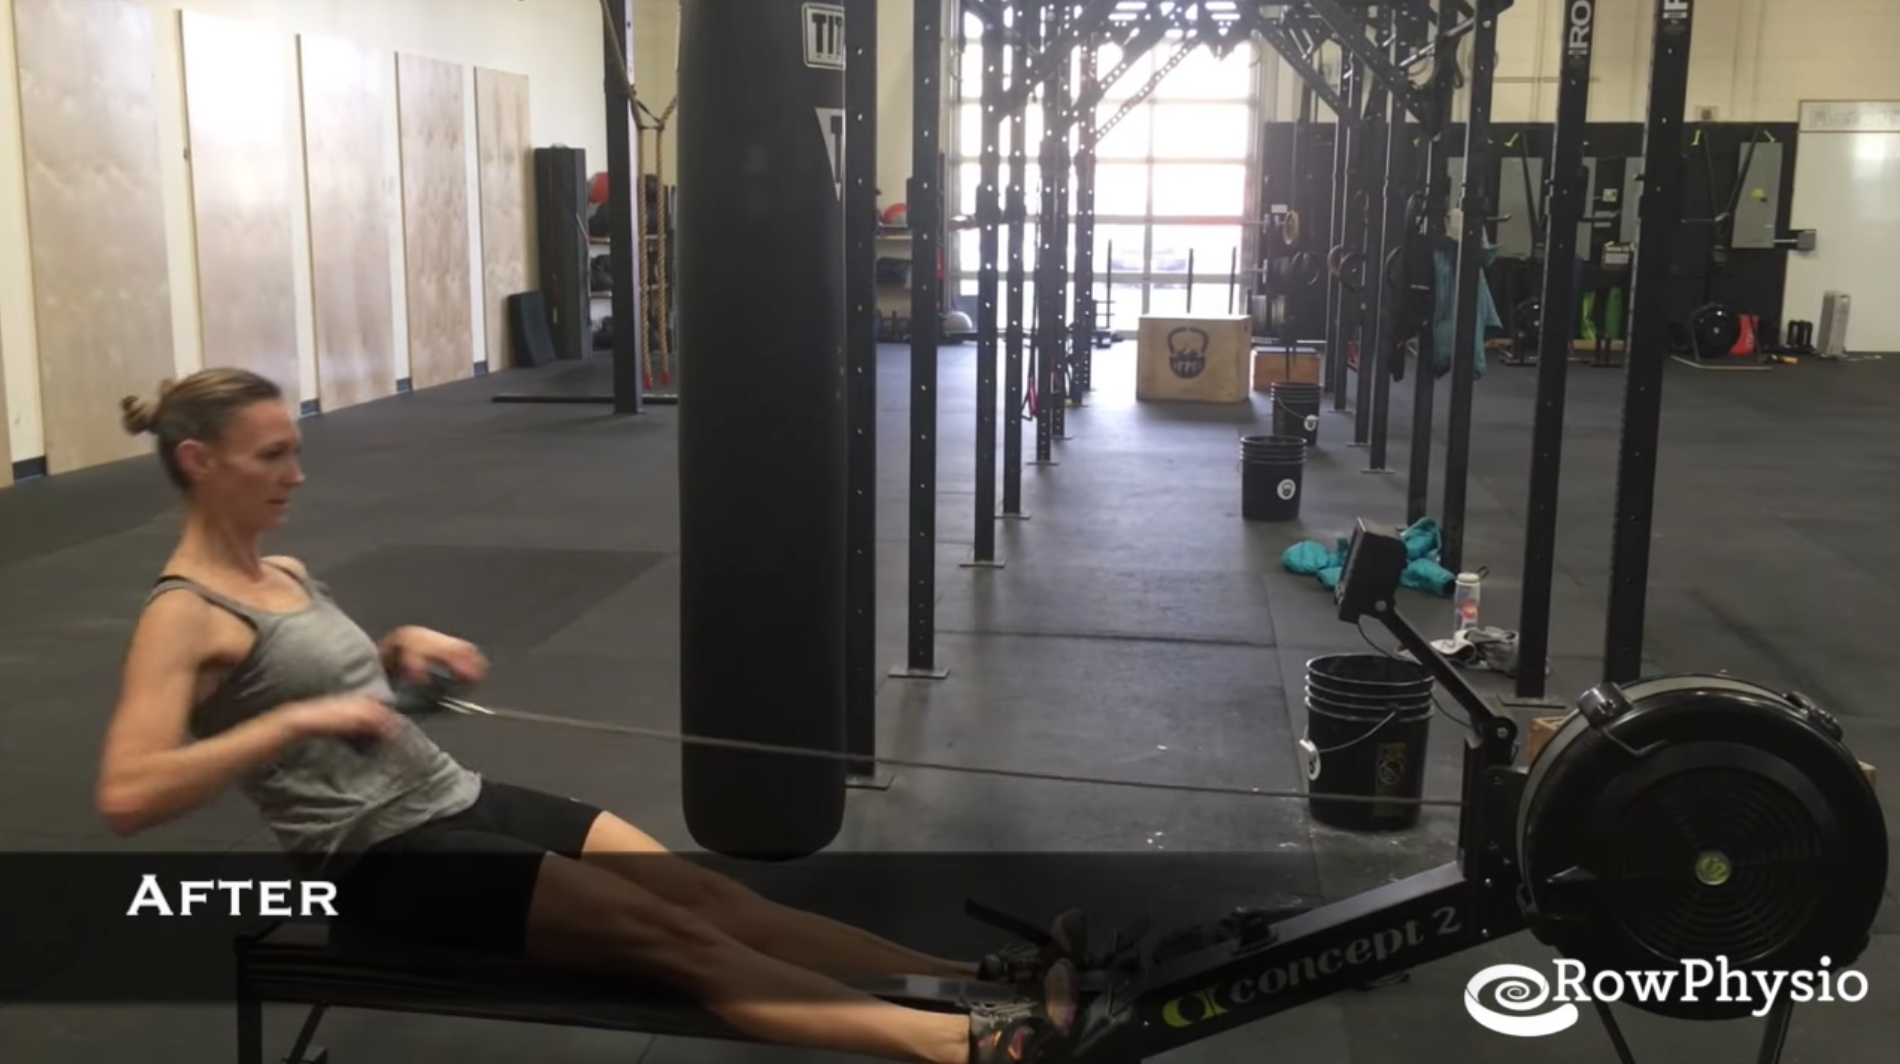 https://rowphysio.com/services-2/detailed-rowing-form-critique-and-mentoring